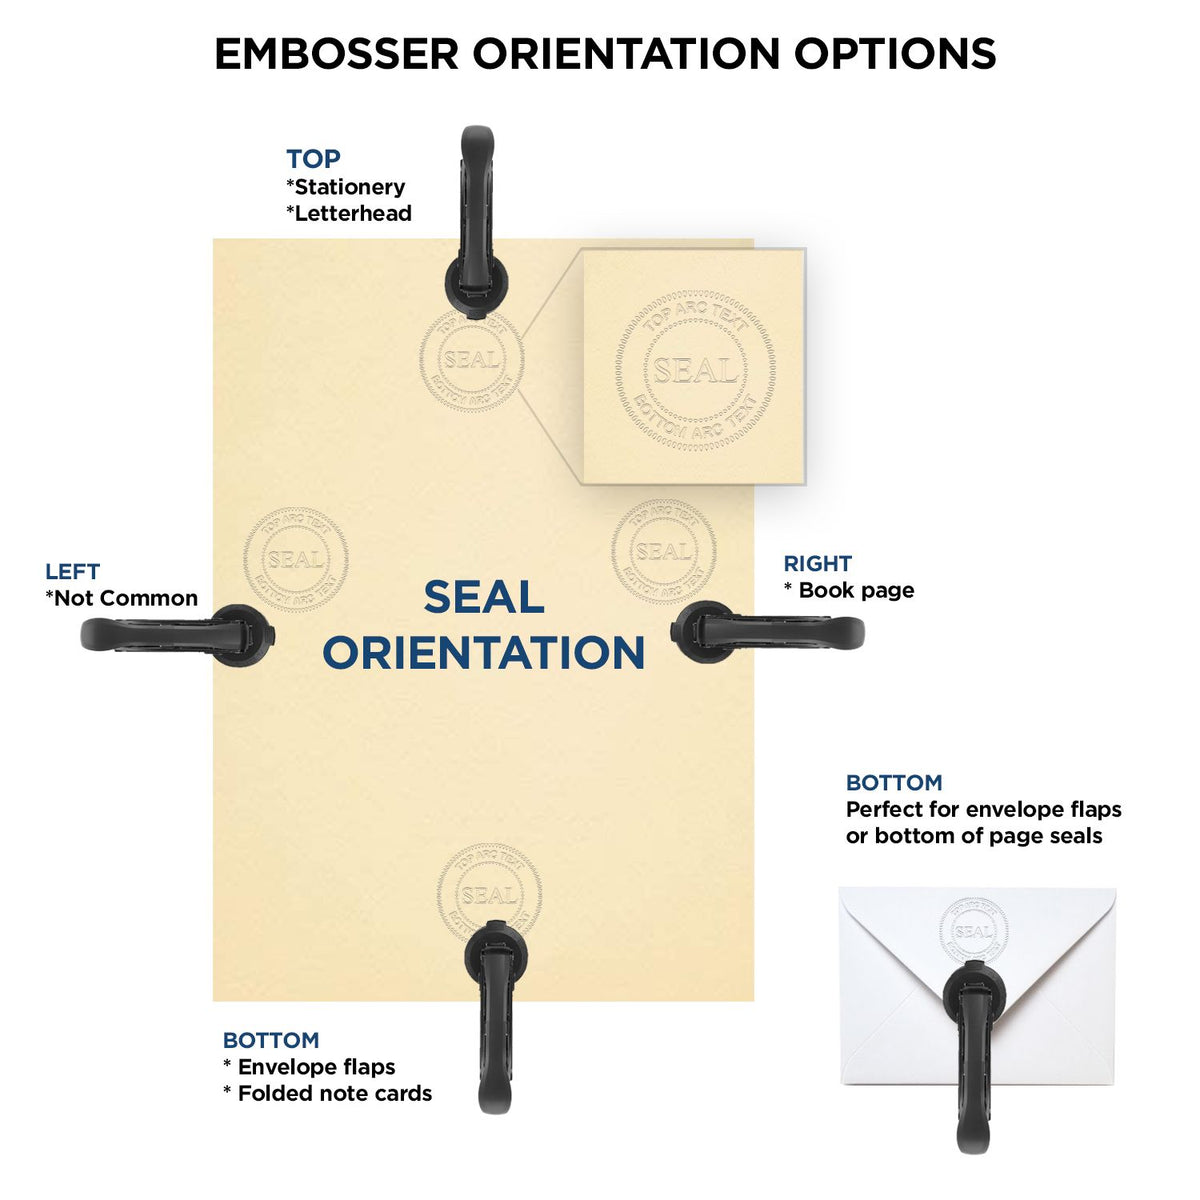 An infographic for the Illinois Geologist Desk Seal showing embosser orientation, this is showing examples of a top, bottom, right and left insert.